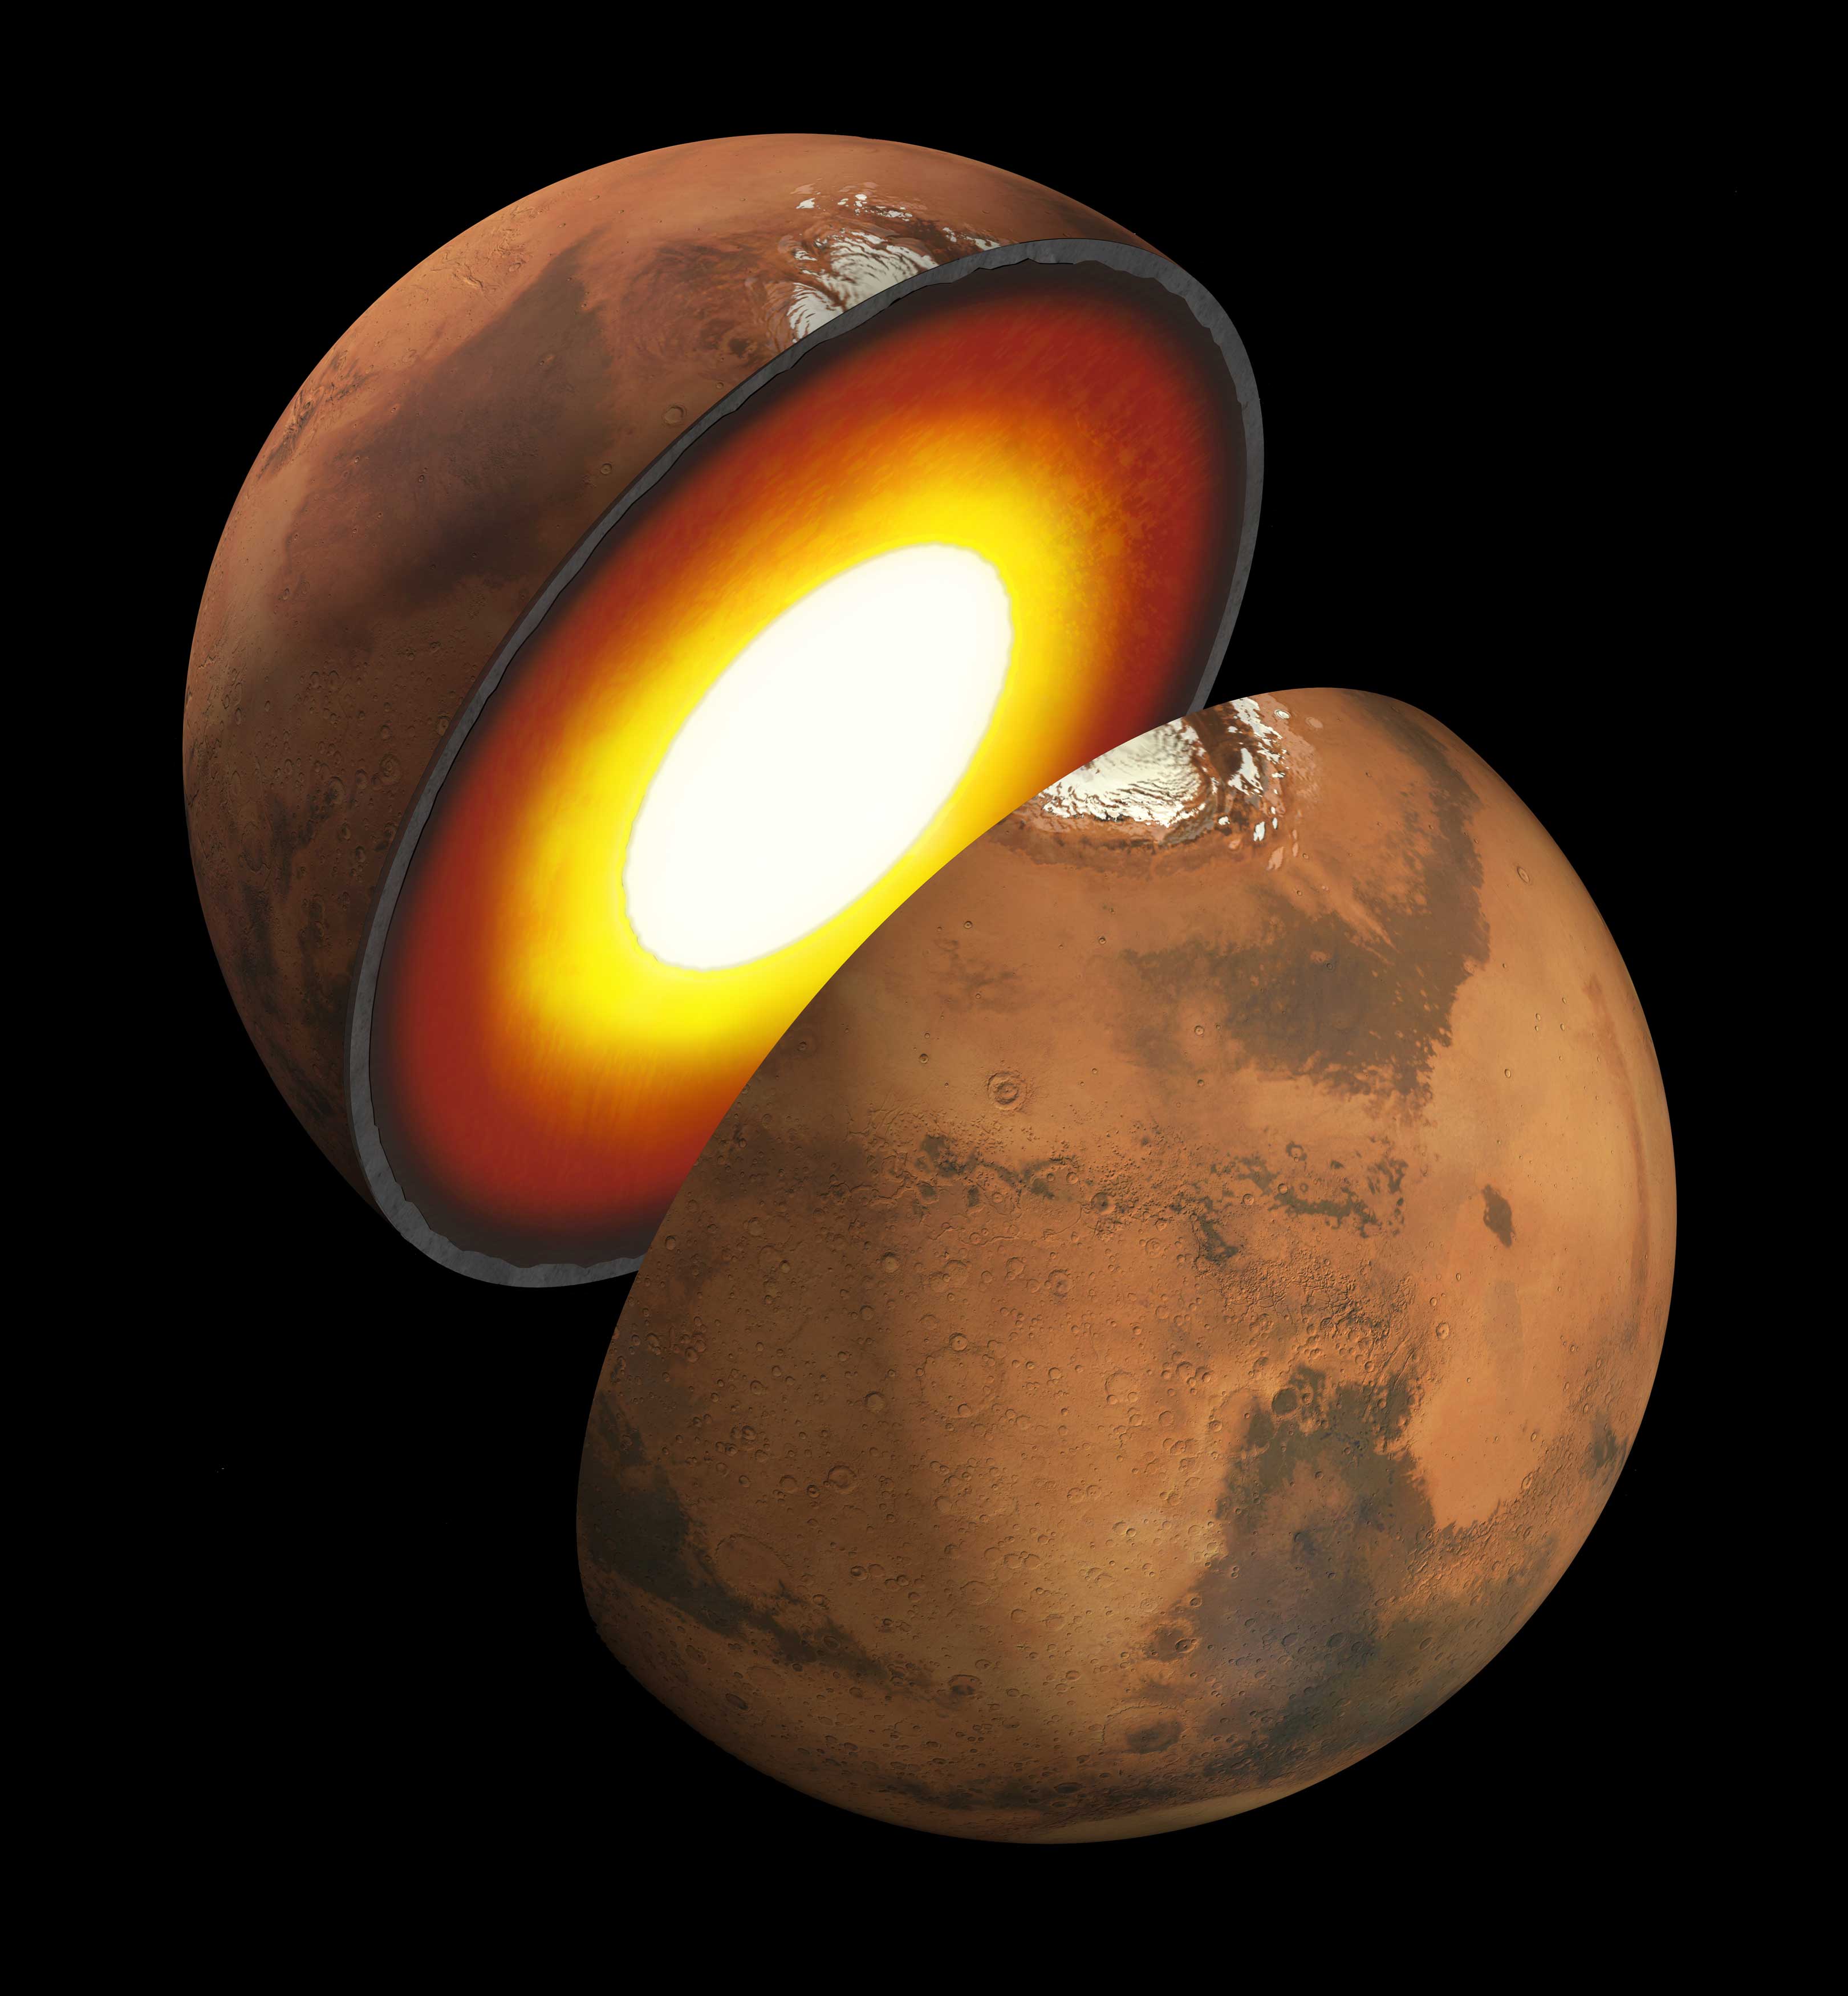 The illustration shows Mars split in half with a glowing interior that gets hotter the deeper into the planet it goes.